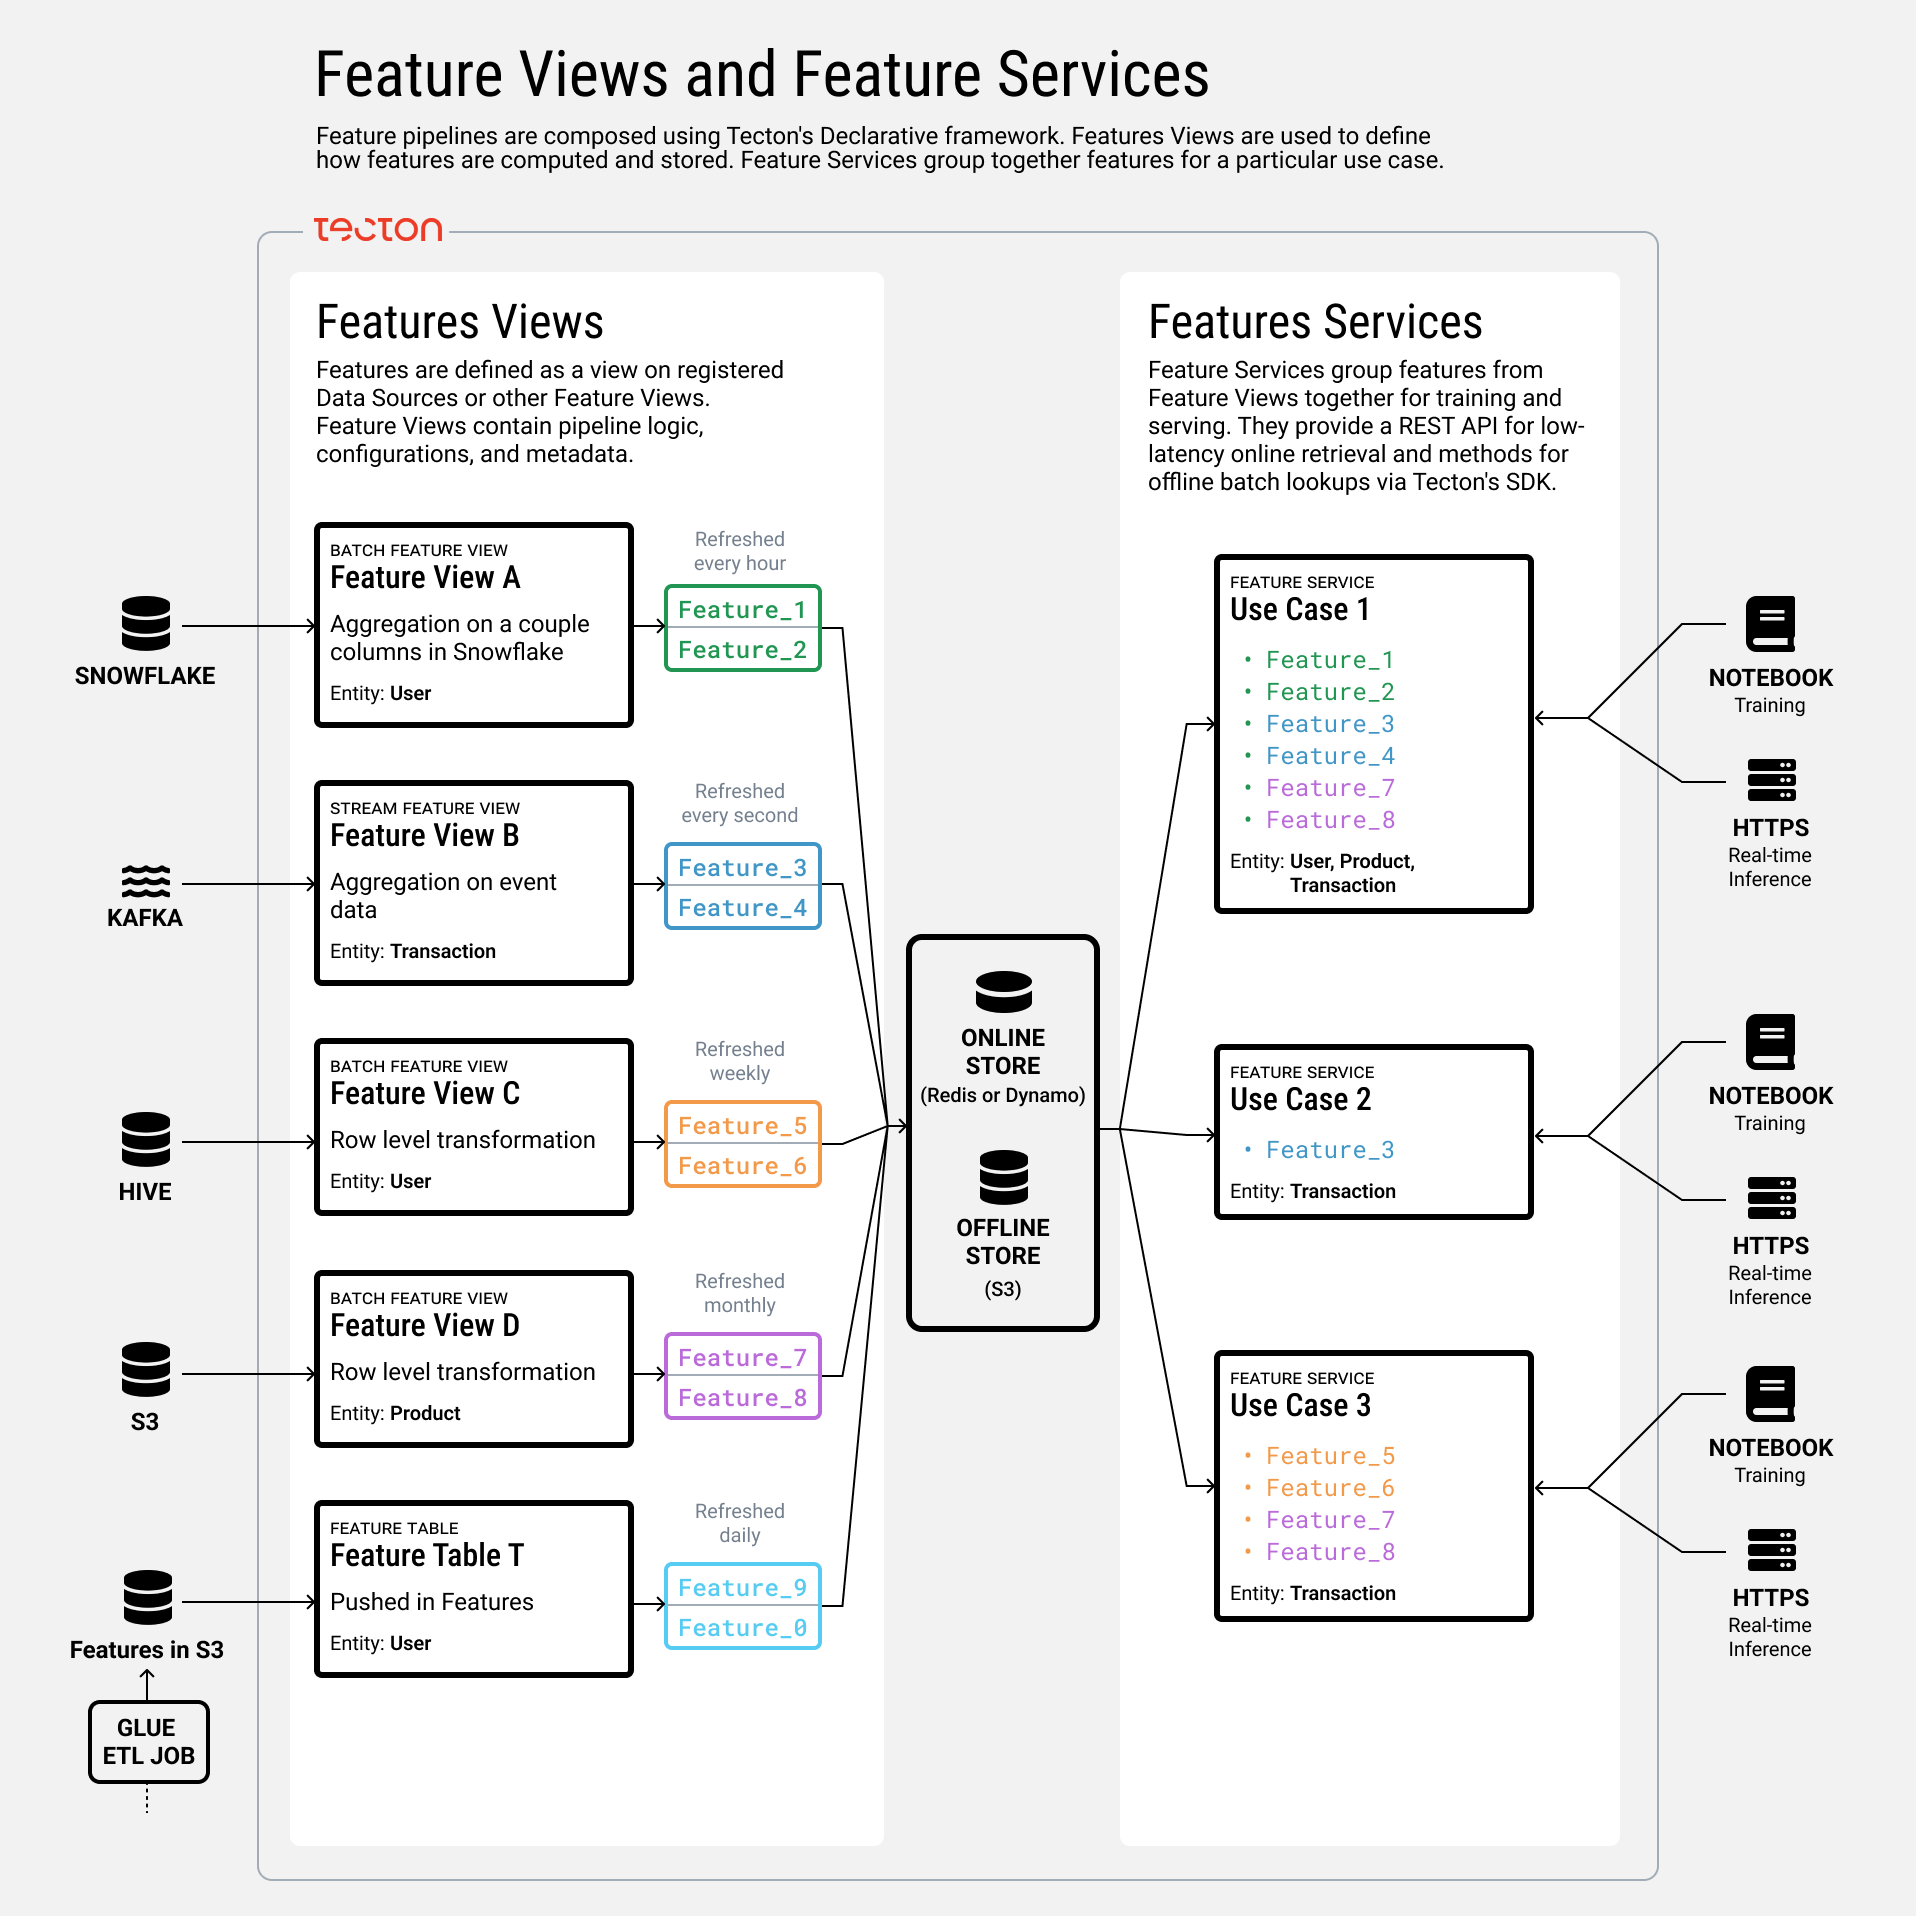 Feature Views and Feature Services